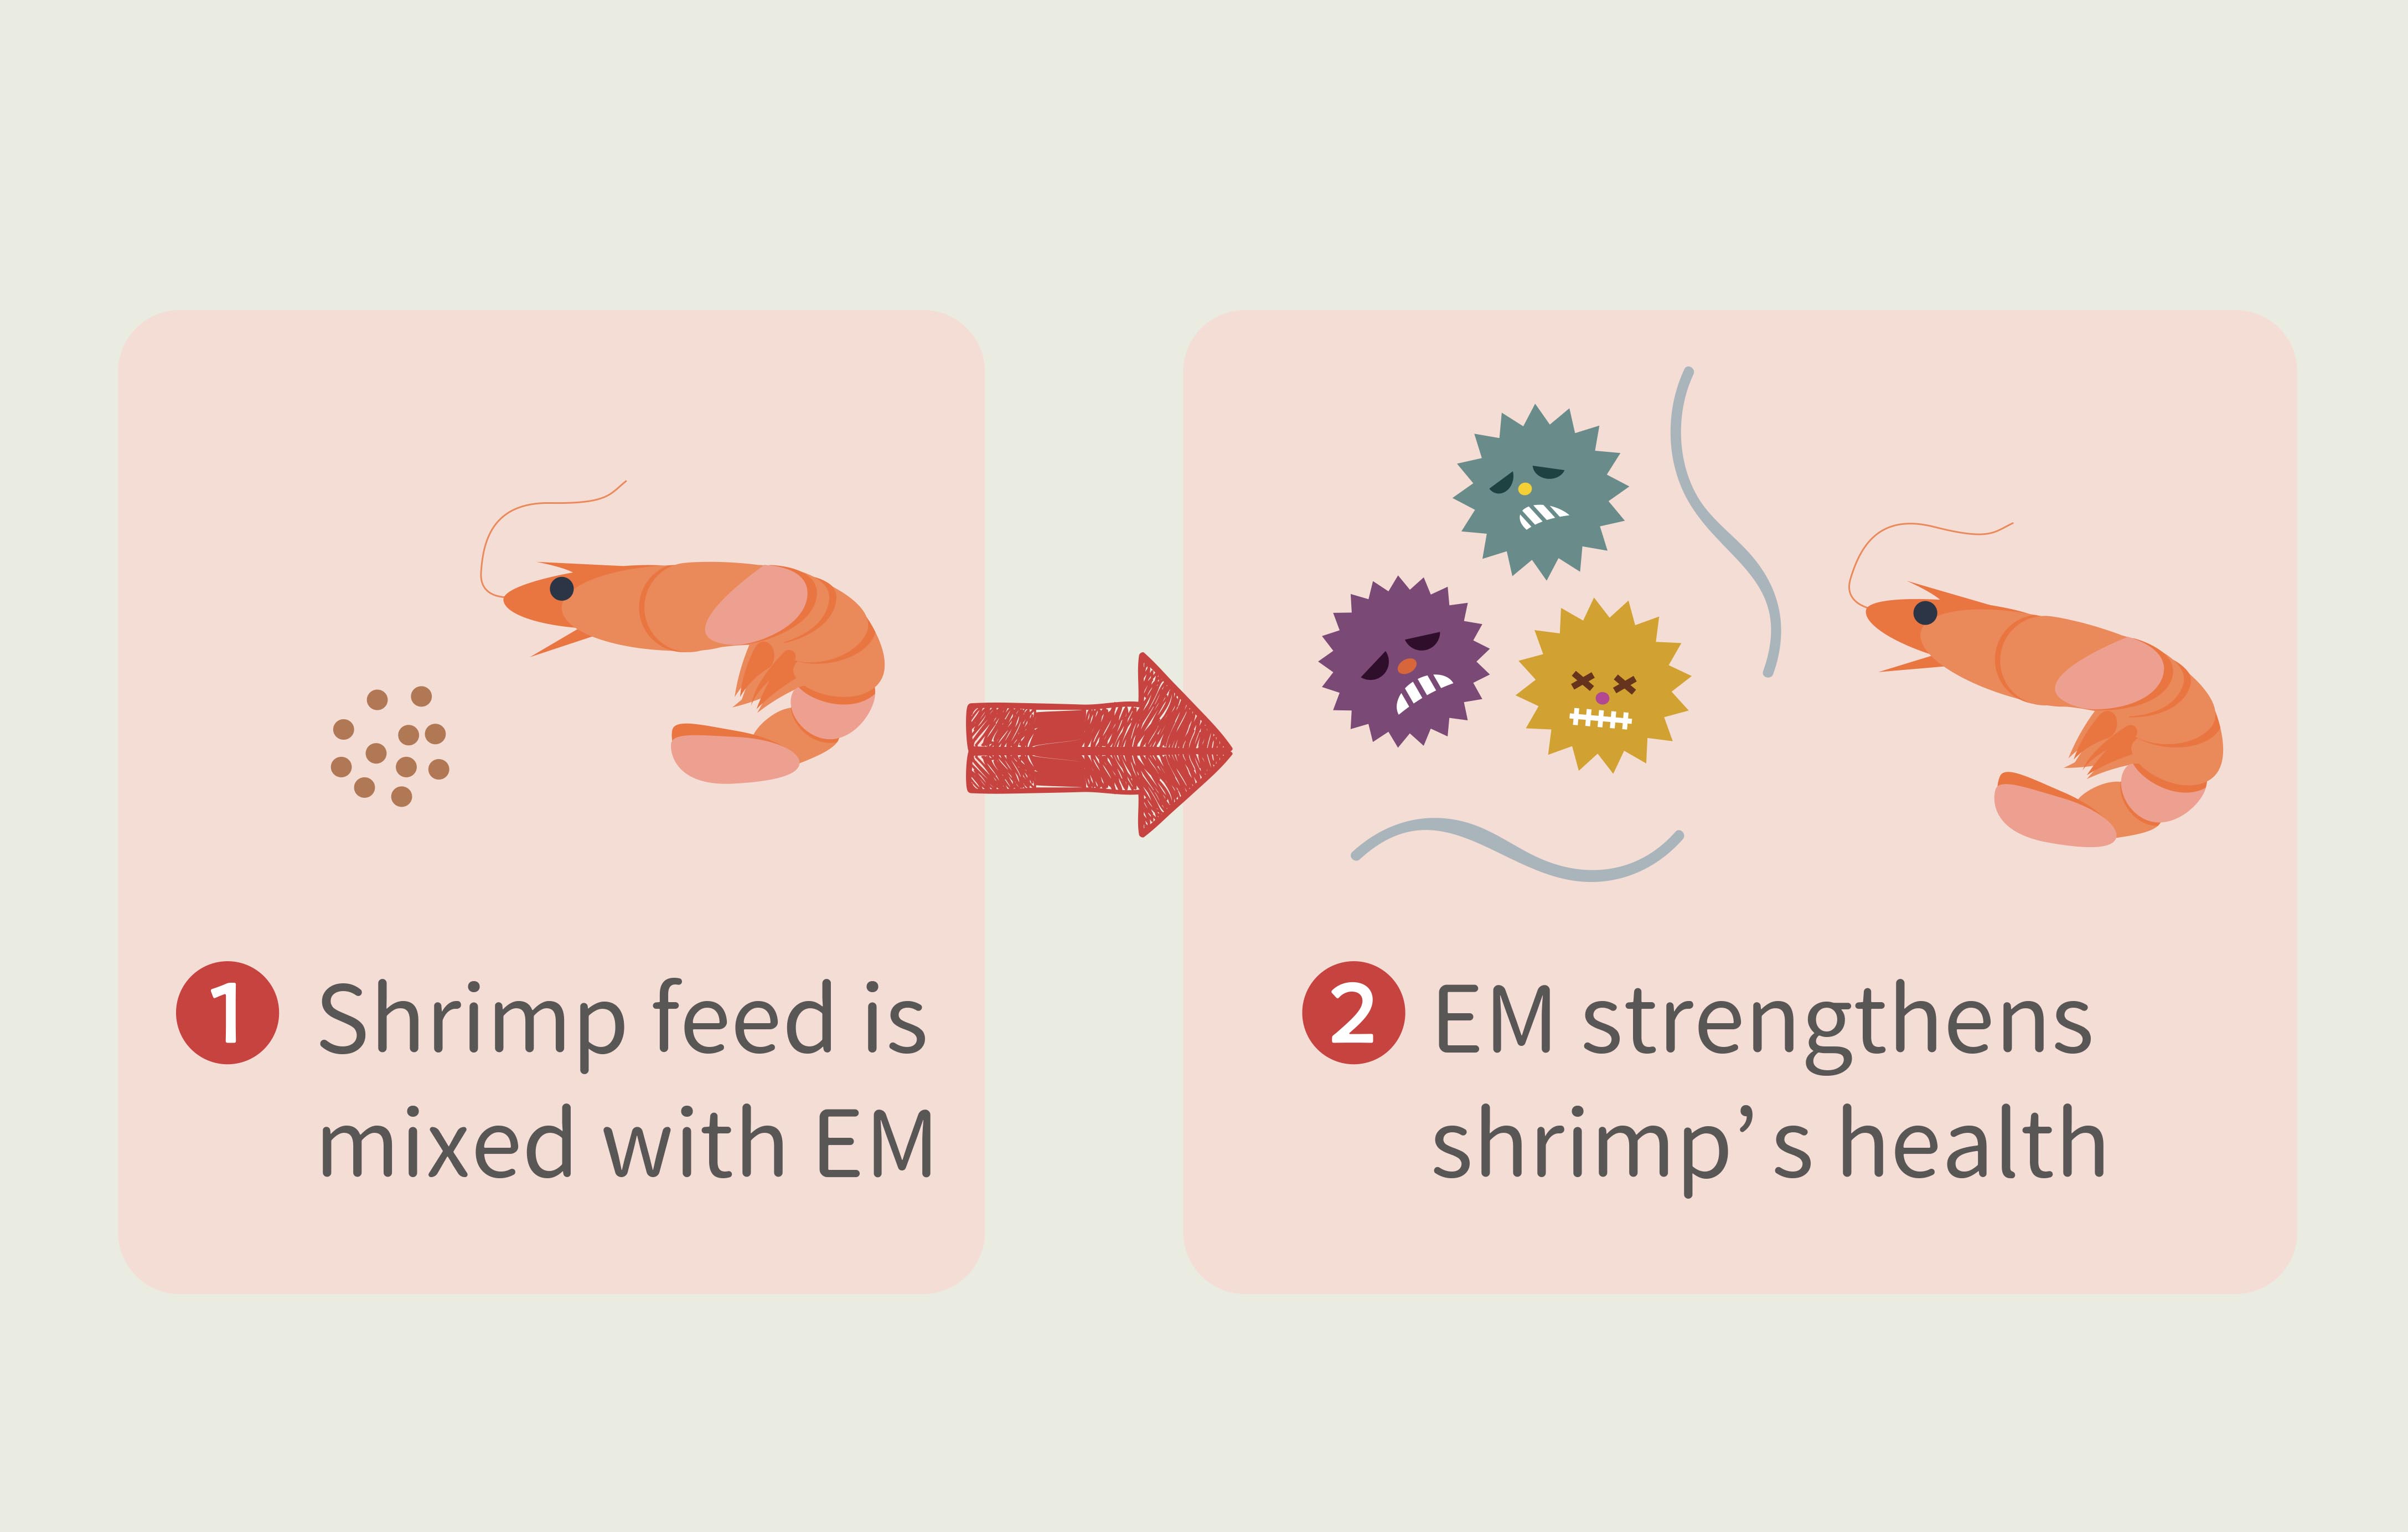 Shrimp feed mixed with EM improves the gut microflora and health 